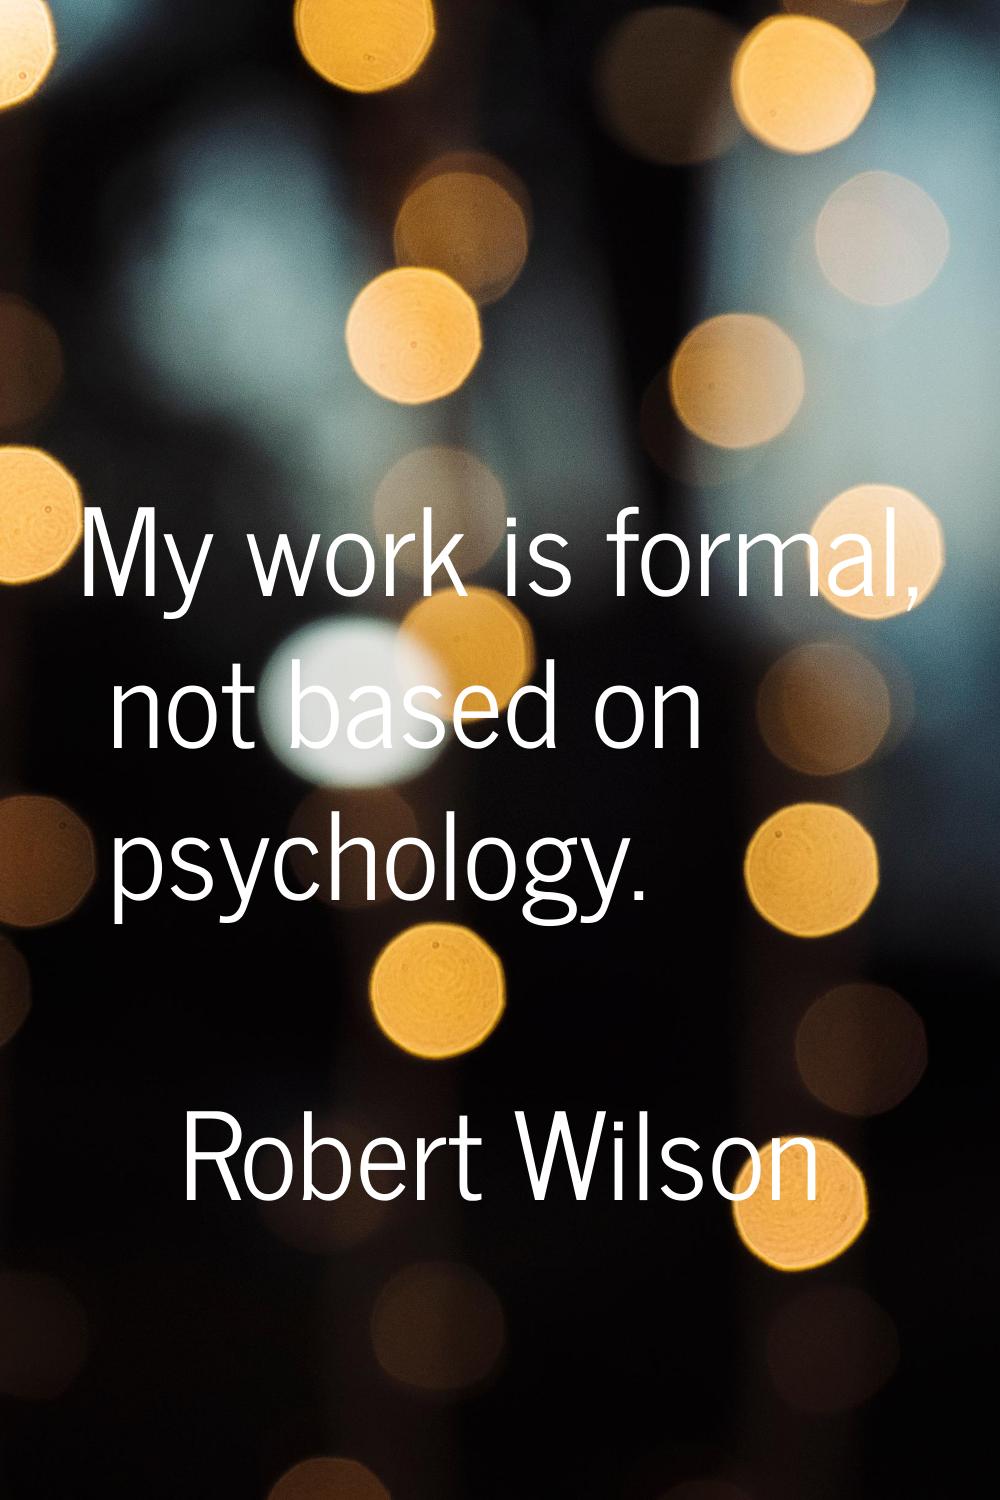 My work is formal, not based on psychology.